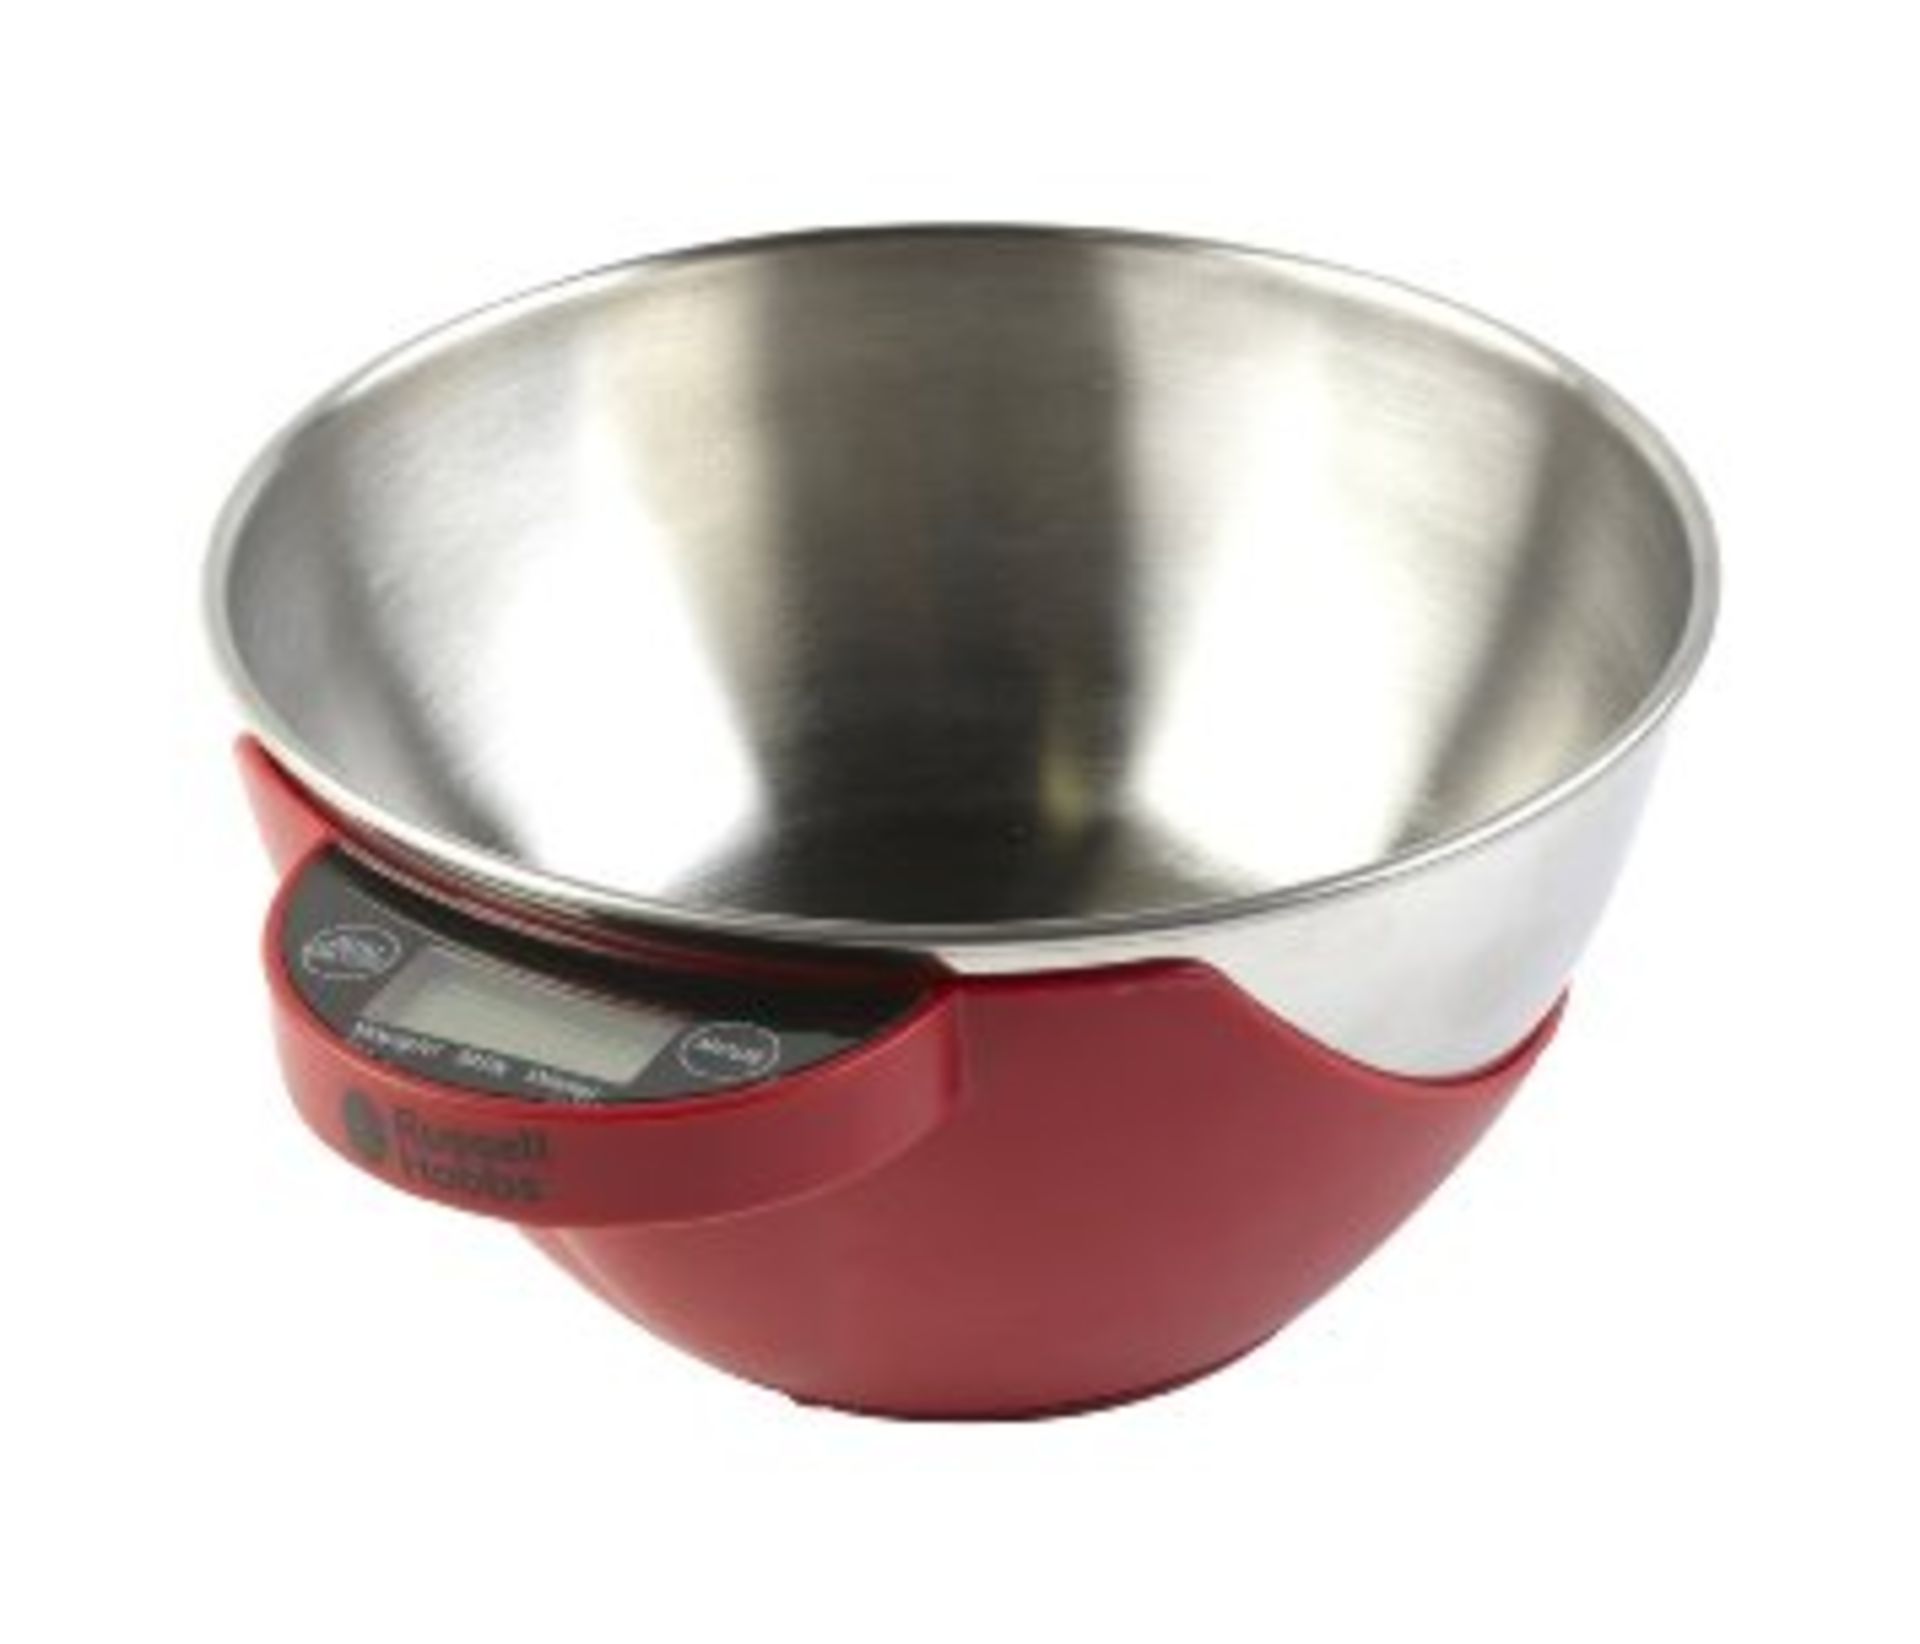 V Brand New Russell Hobbs Digia 5kg Bowl Scale RRP22.99